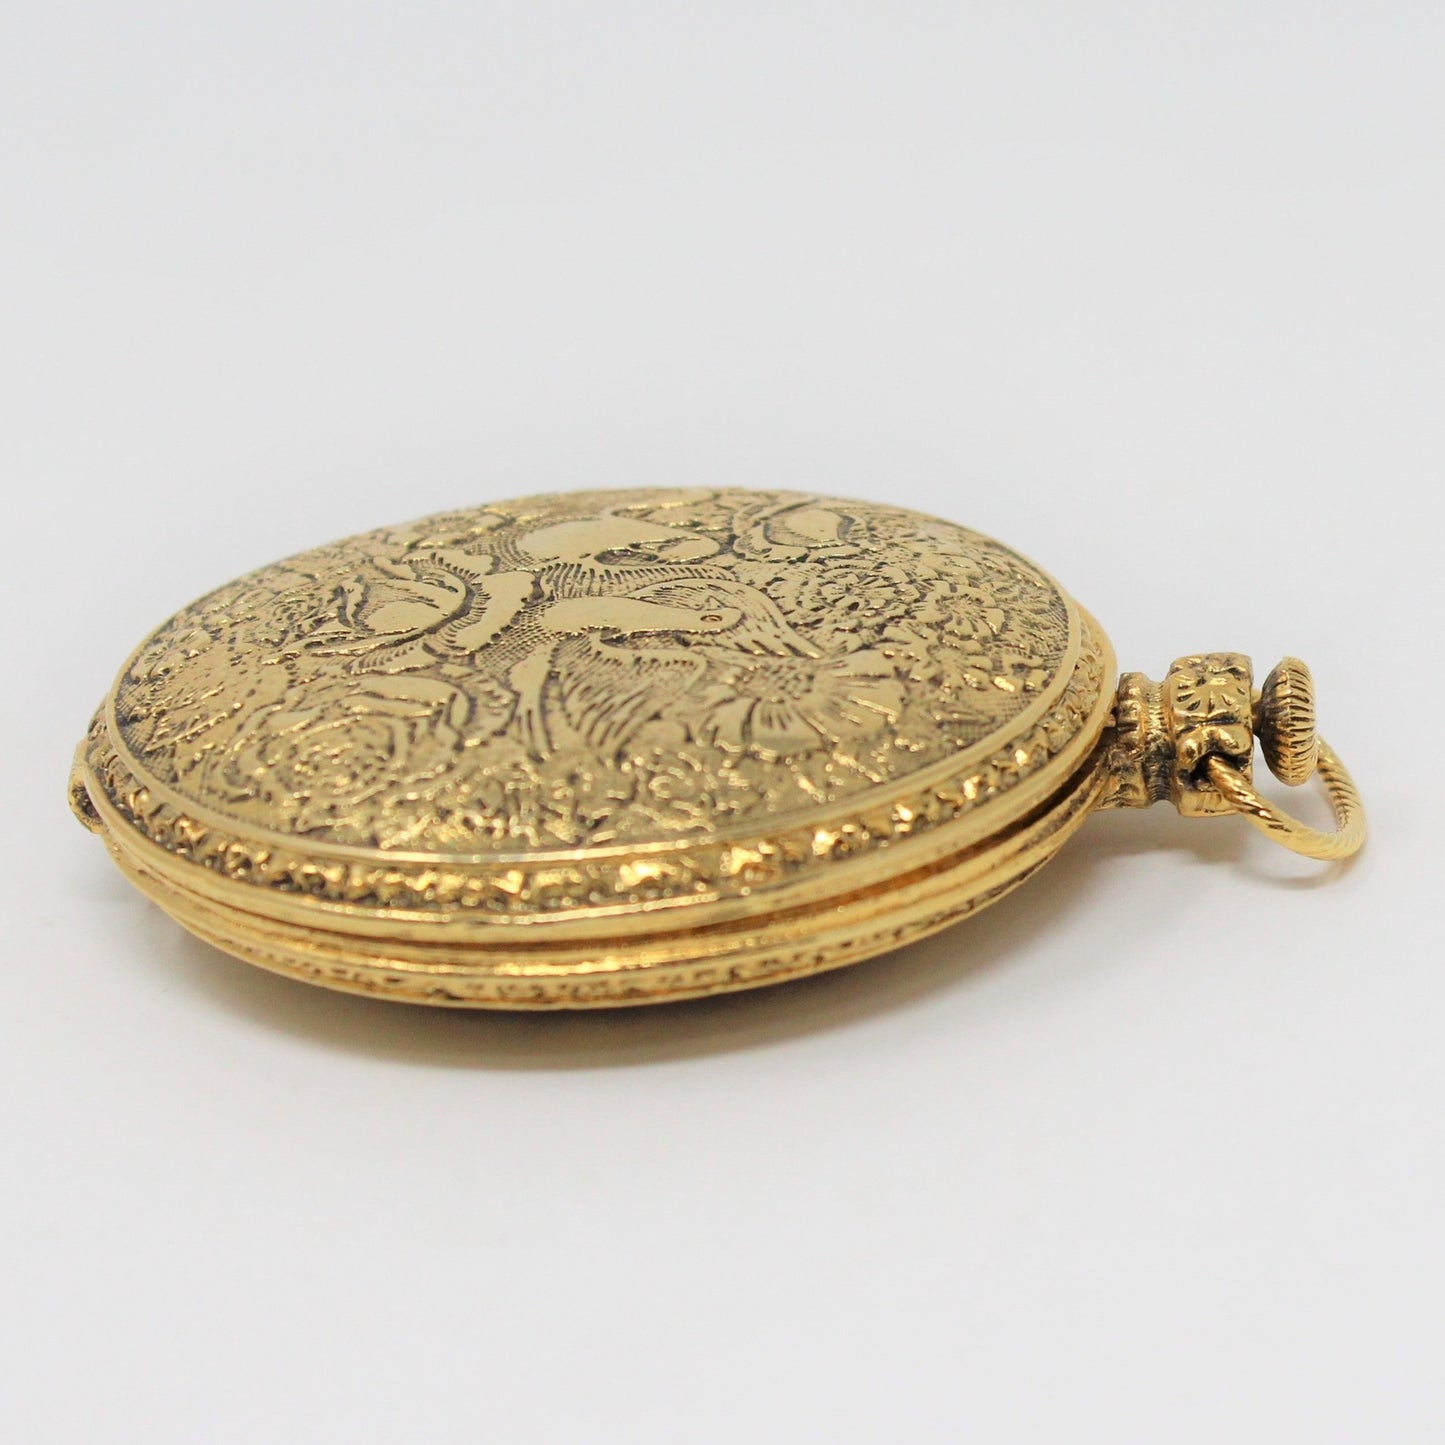 Pendant, Max Factor, Pocket Watch Style Pressed Powder Compact, Golden Doves/Birds, Vintage